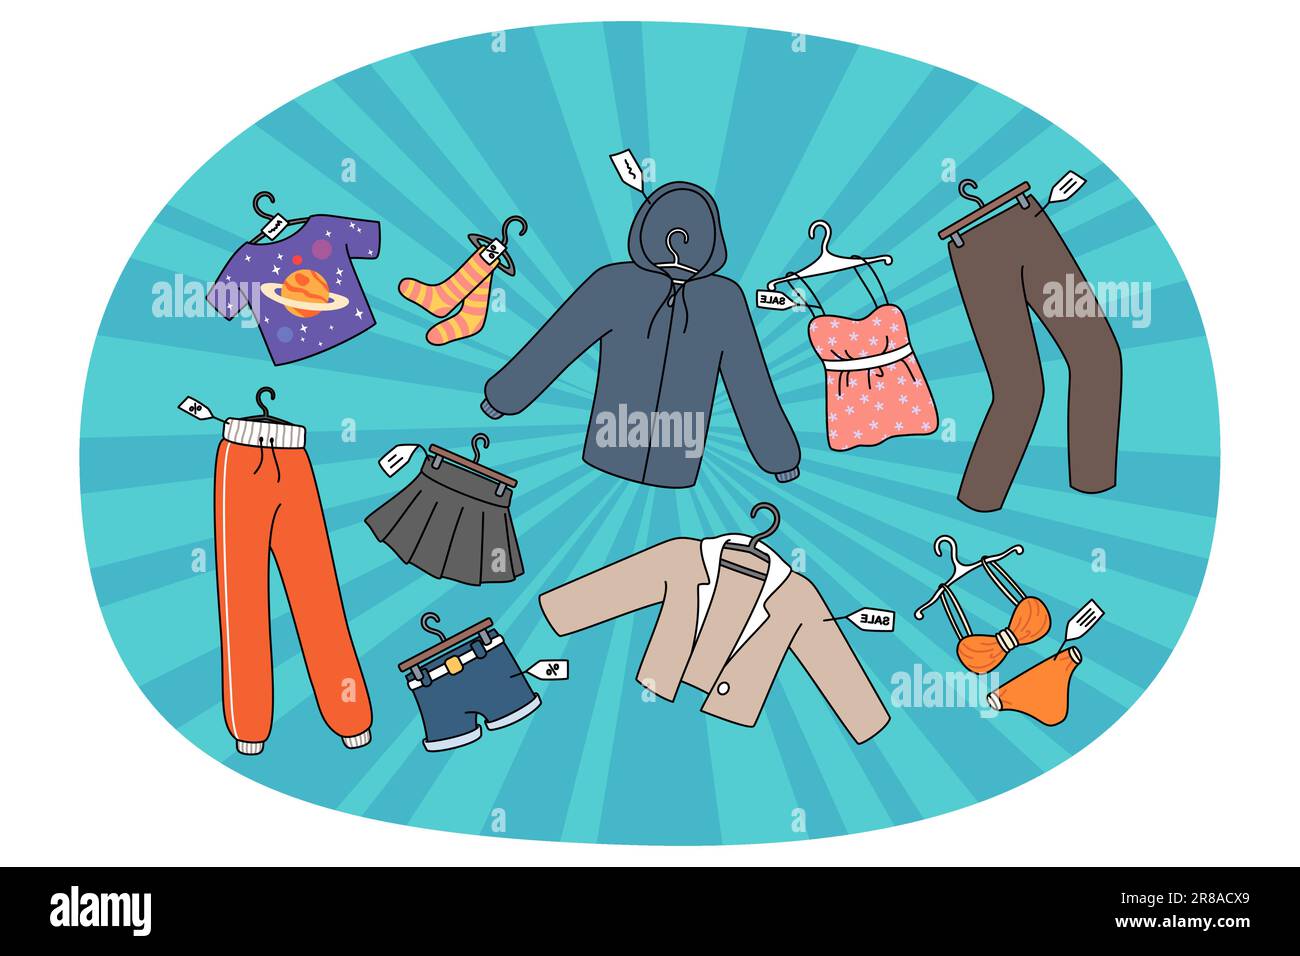 Price tags clothing Stock Vector Images - Alamy